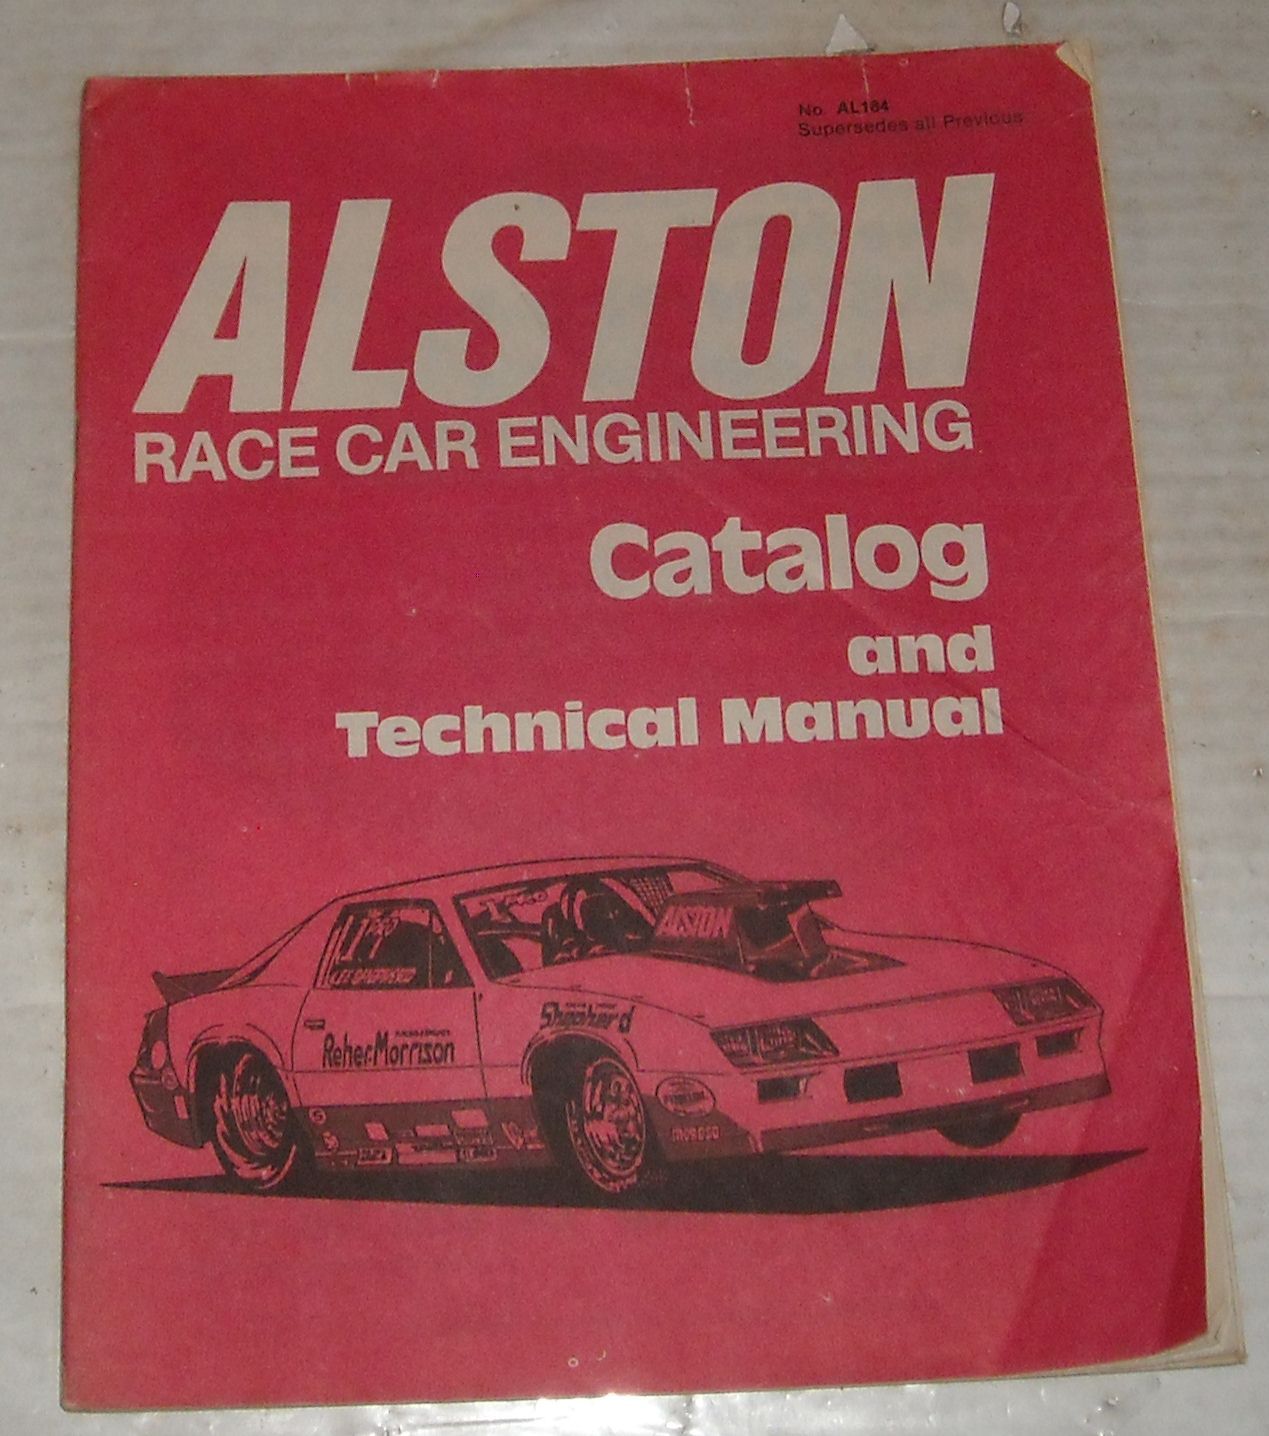 1984 ALLSTON RACE CAR ENGINEERING CATALOG and TECHNICAL MANUAL